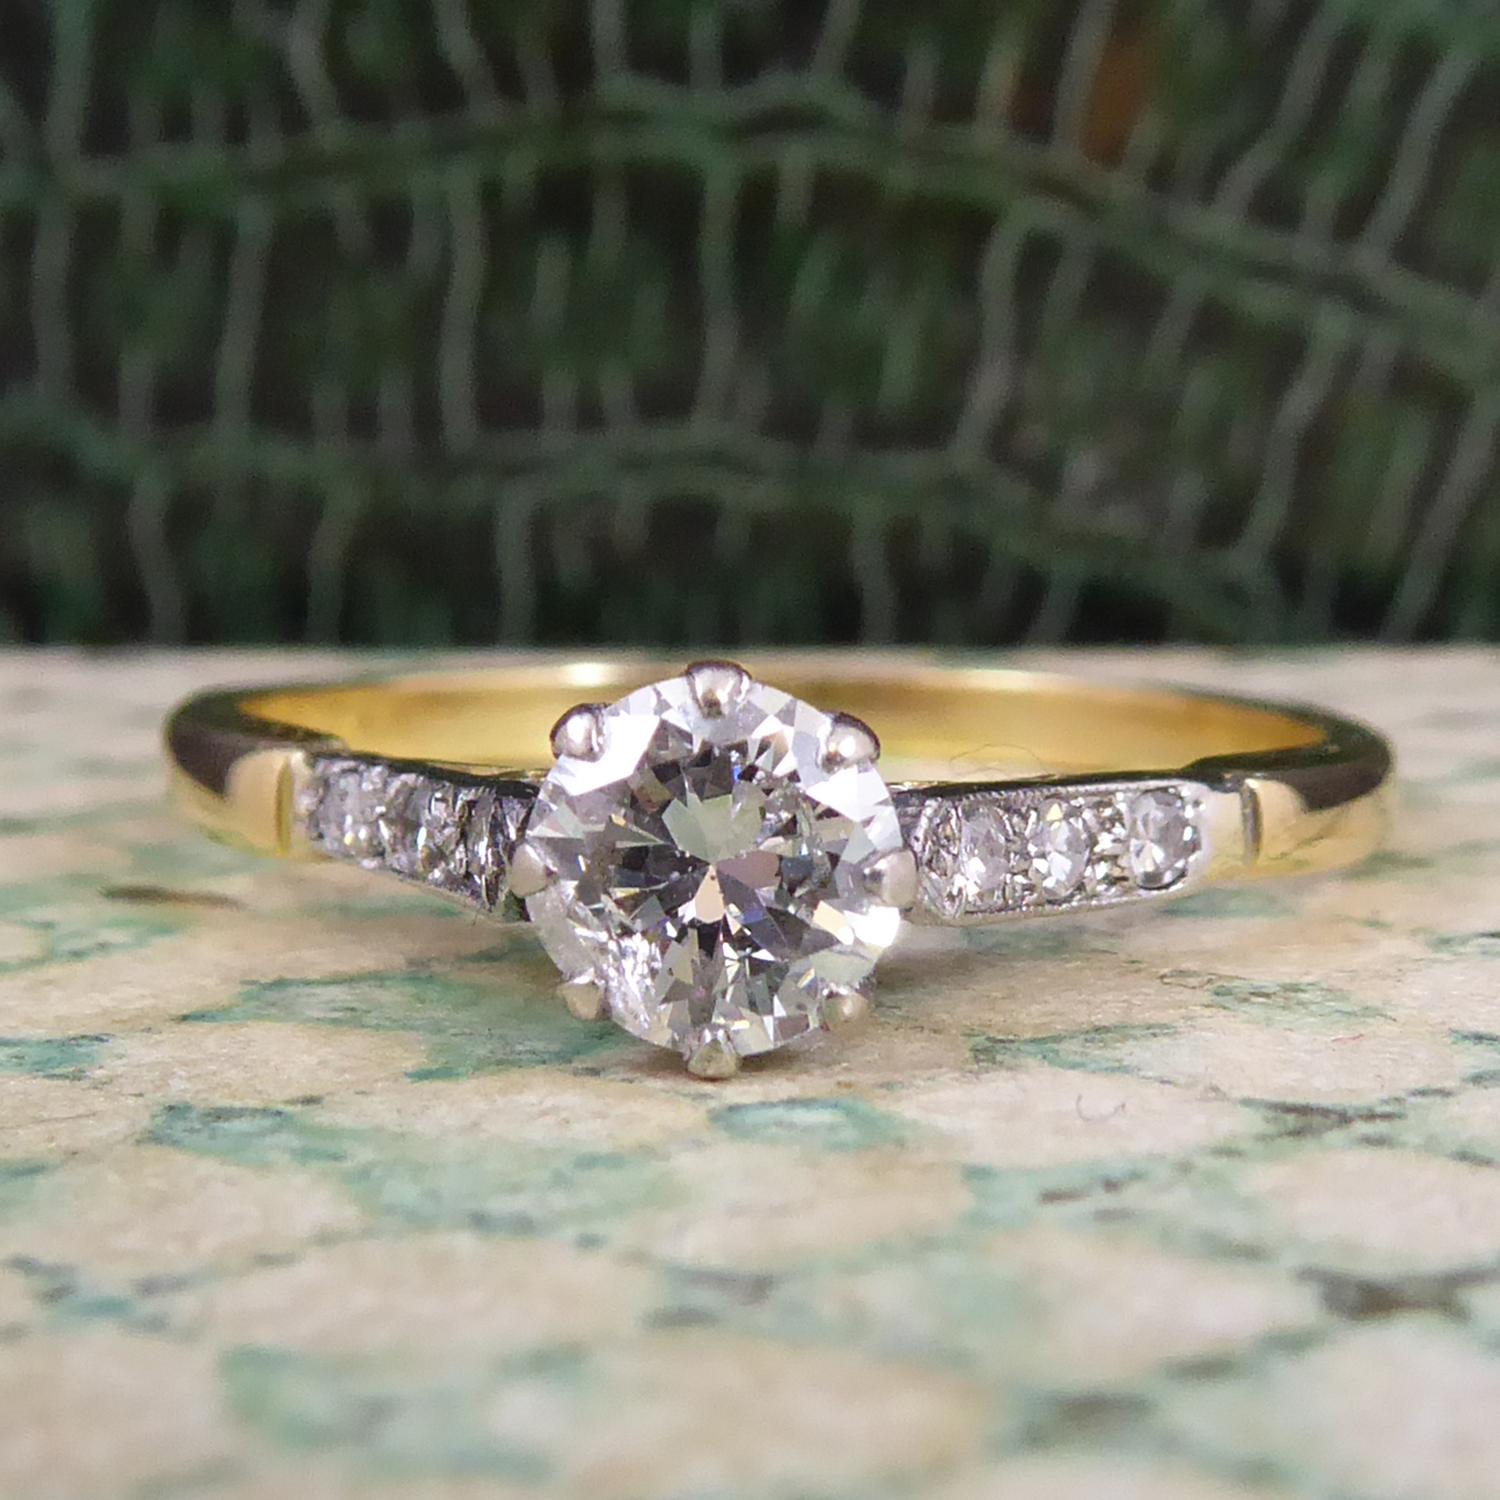 A neat and petite vintage diamond ring from the mid-20th century era.  Featuring a single diamond approx. 0.54ct held in a white rex coronet setting.  To either side of the main diaond are three 8-cut diamonds to white-fronted and pointed shoulders.